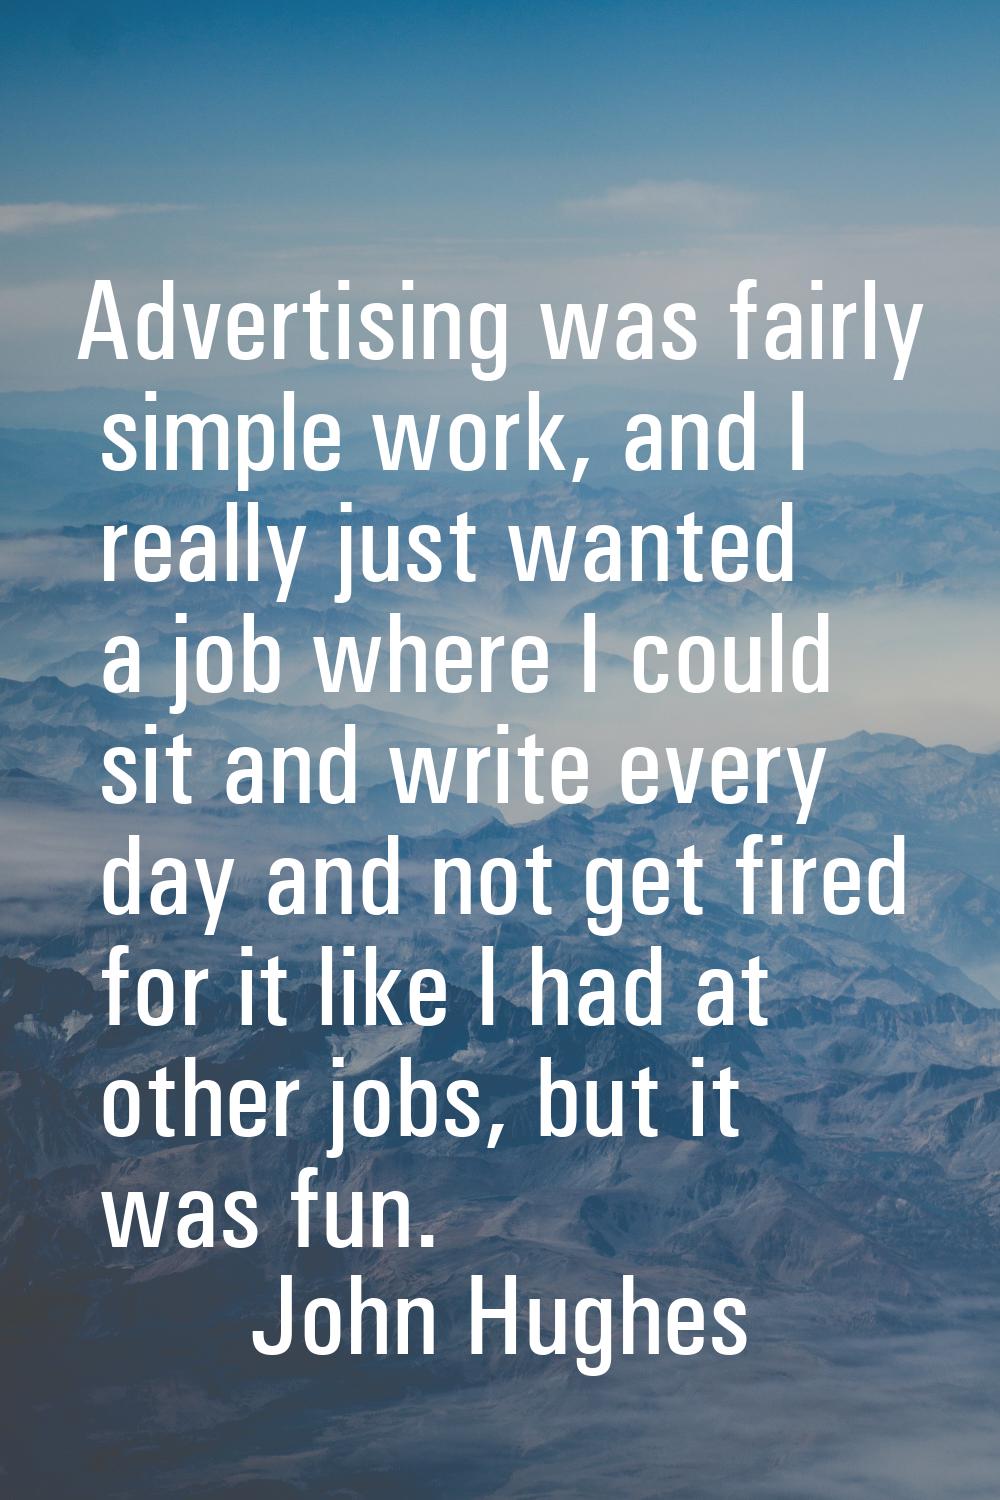 Advertising was fairly simple work, and I really just wanted a job where I could sit and write ever